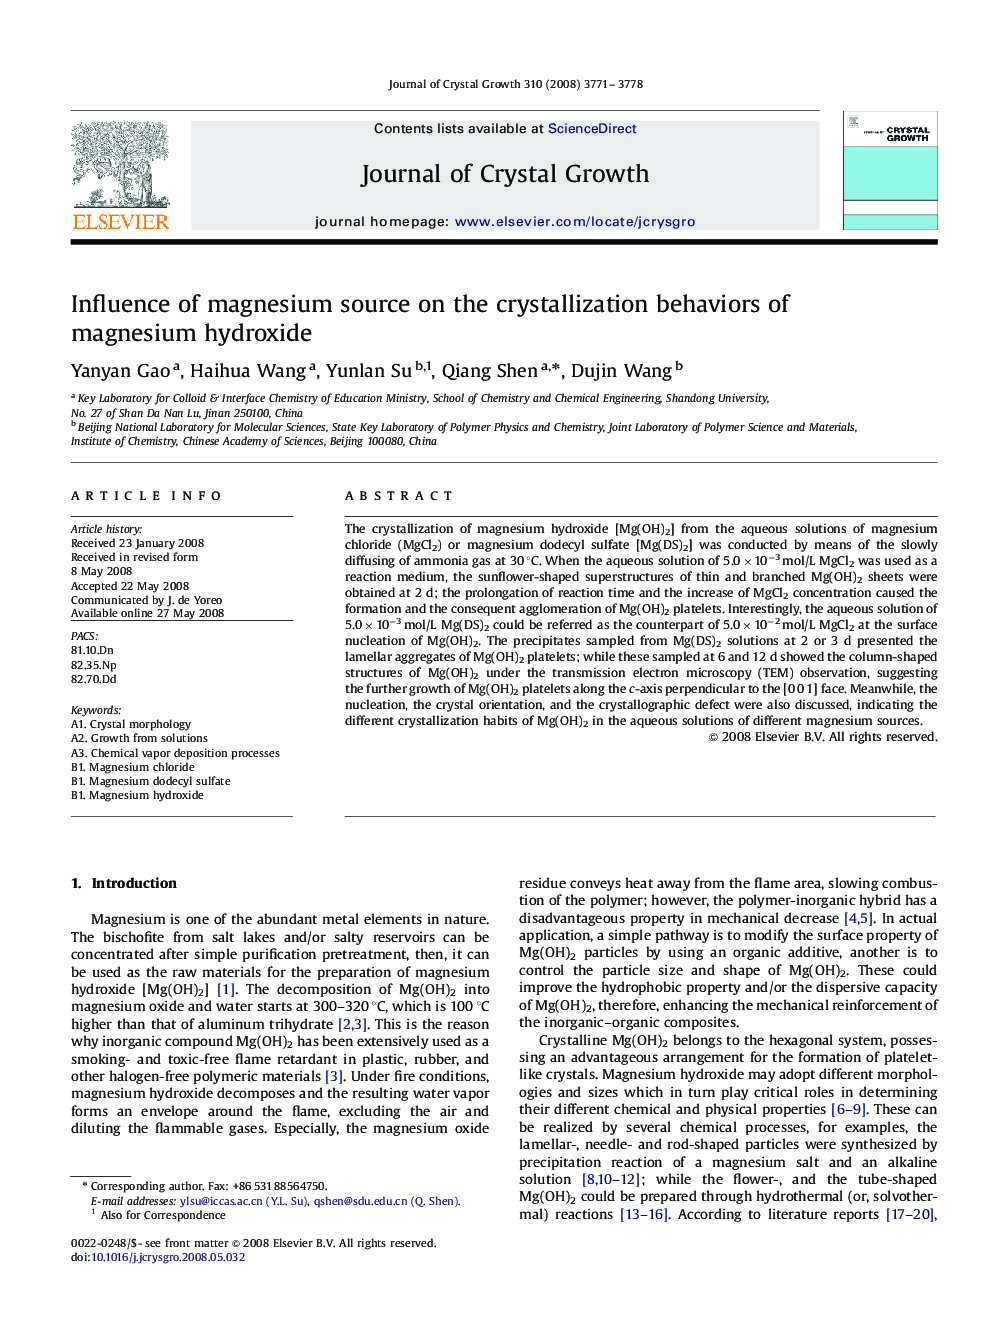 Influence of magnesium source on the crystallization behaviors of magnesium hydroxide